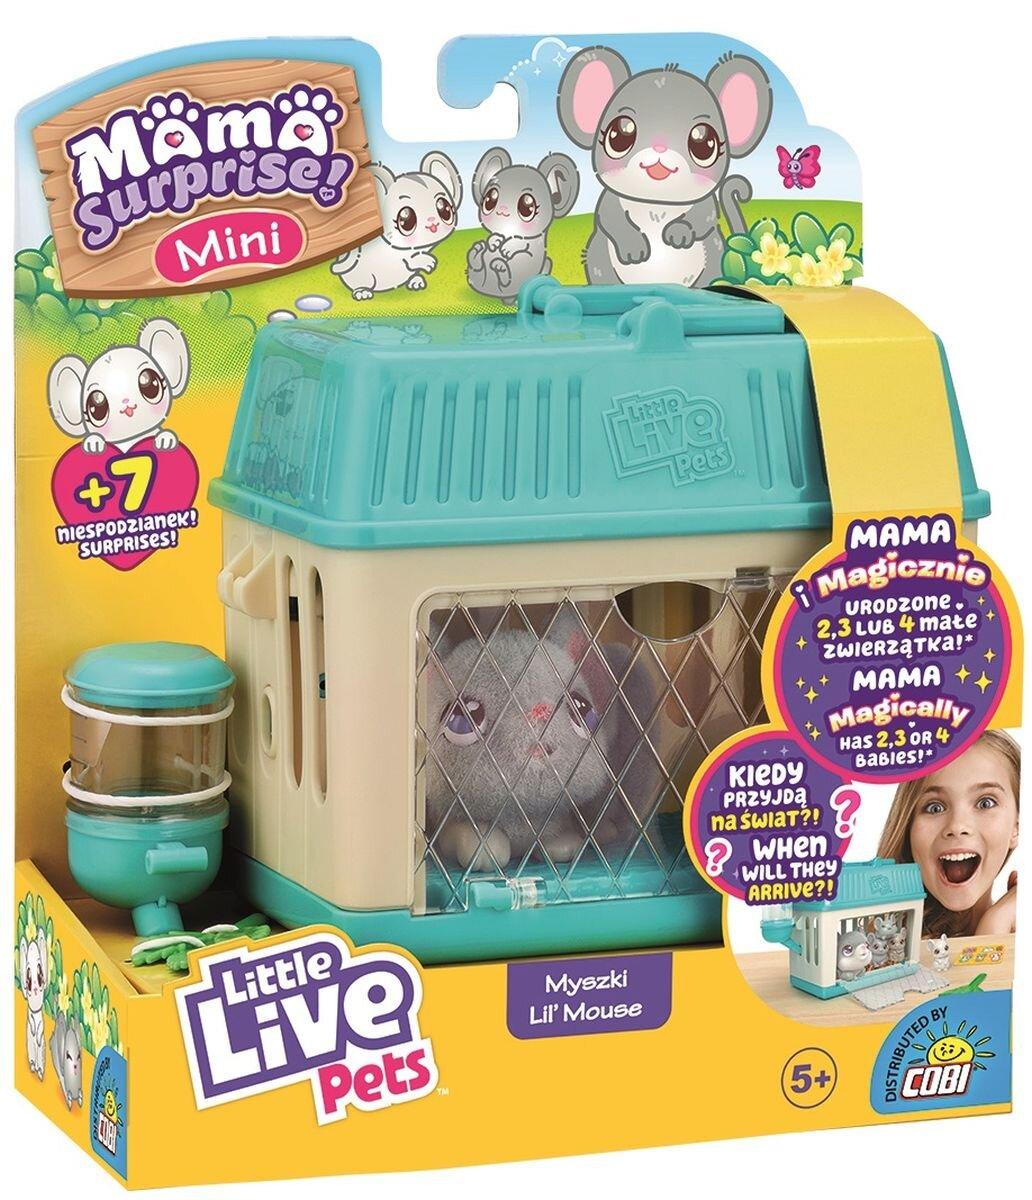 Little Live Pets Mama Surprise Mini Lil Mouse Interactive Plush Toy  Magically Has 2, 3 OR 4 Babies Moose Toys - ToyWiz